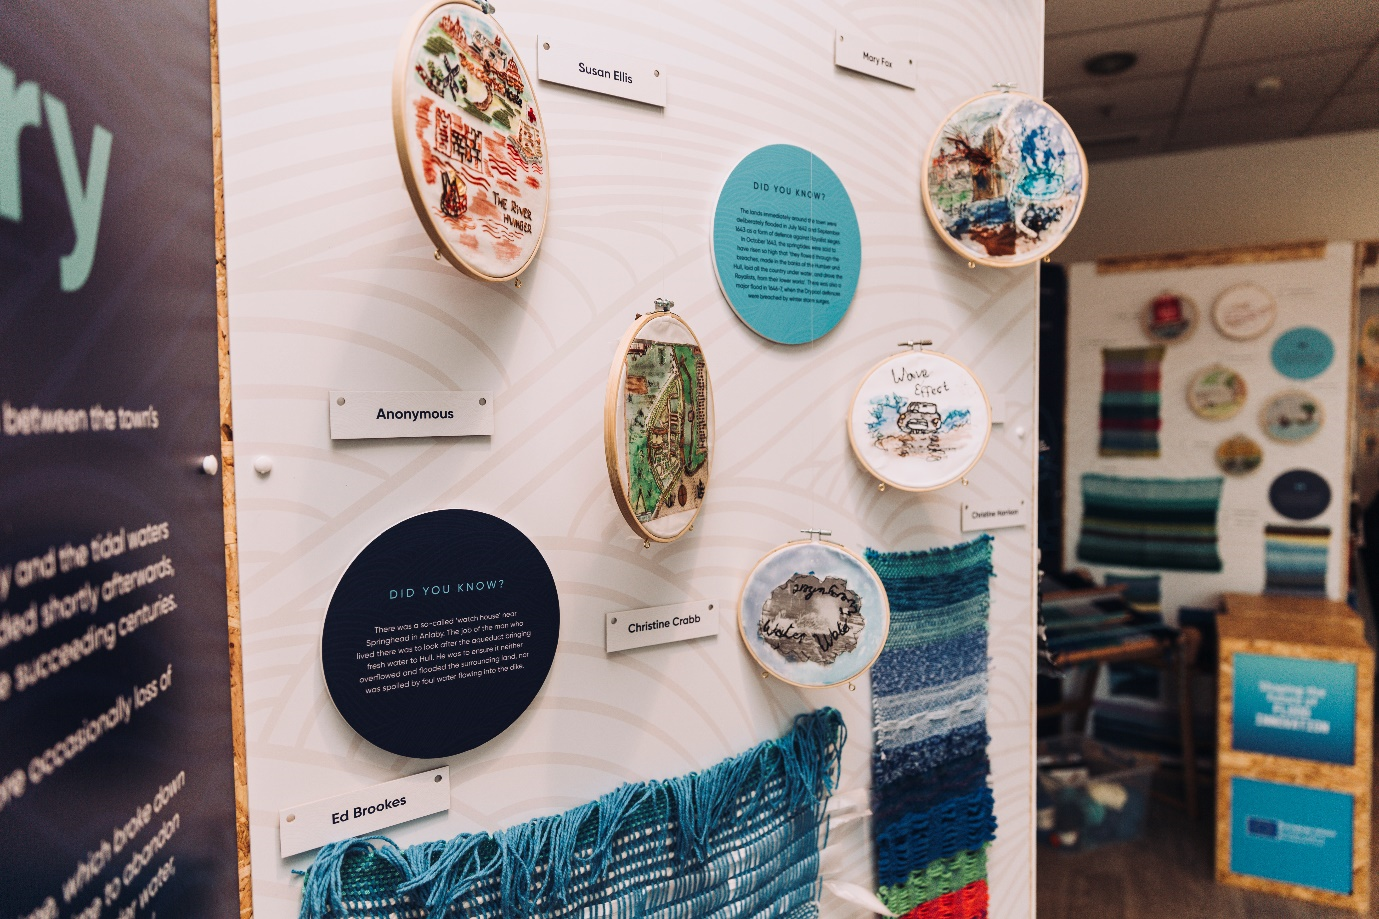 A display of woven and embroidered textile art fhanging from a display board as part of the ‘Follow the Thread’ exhibition